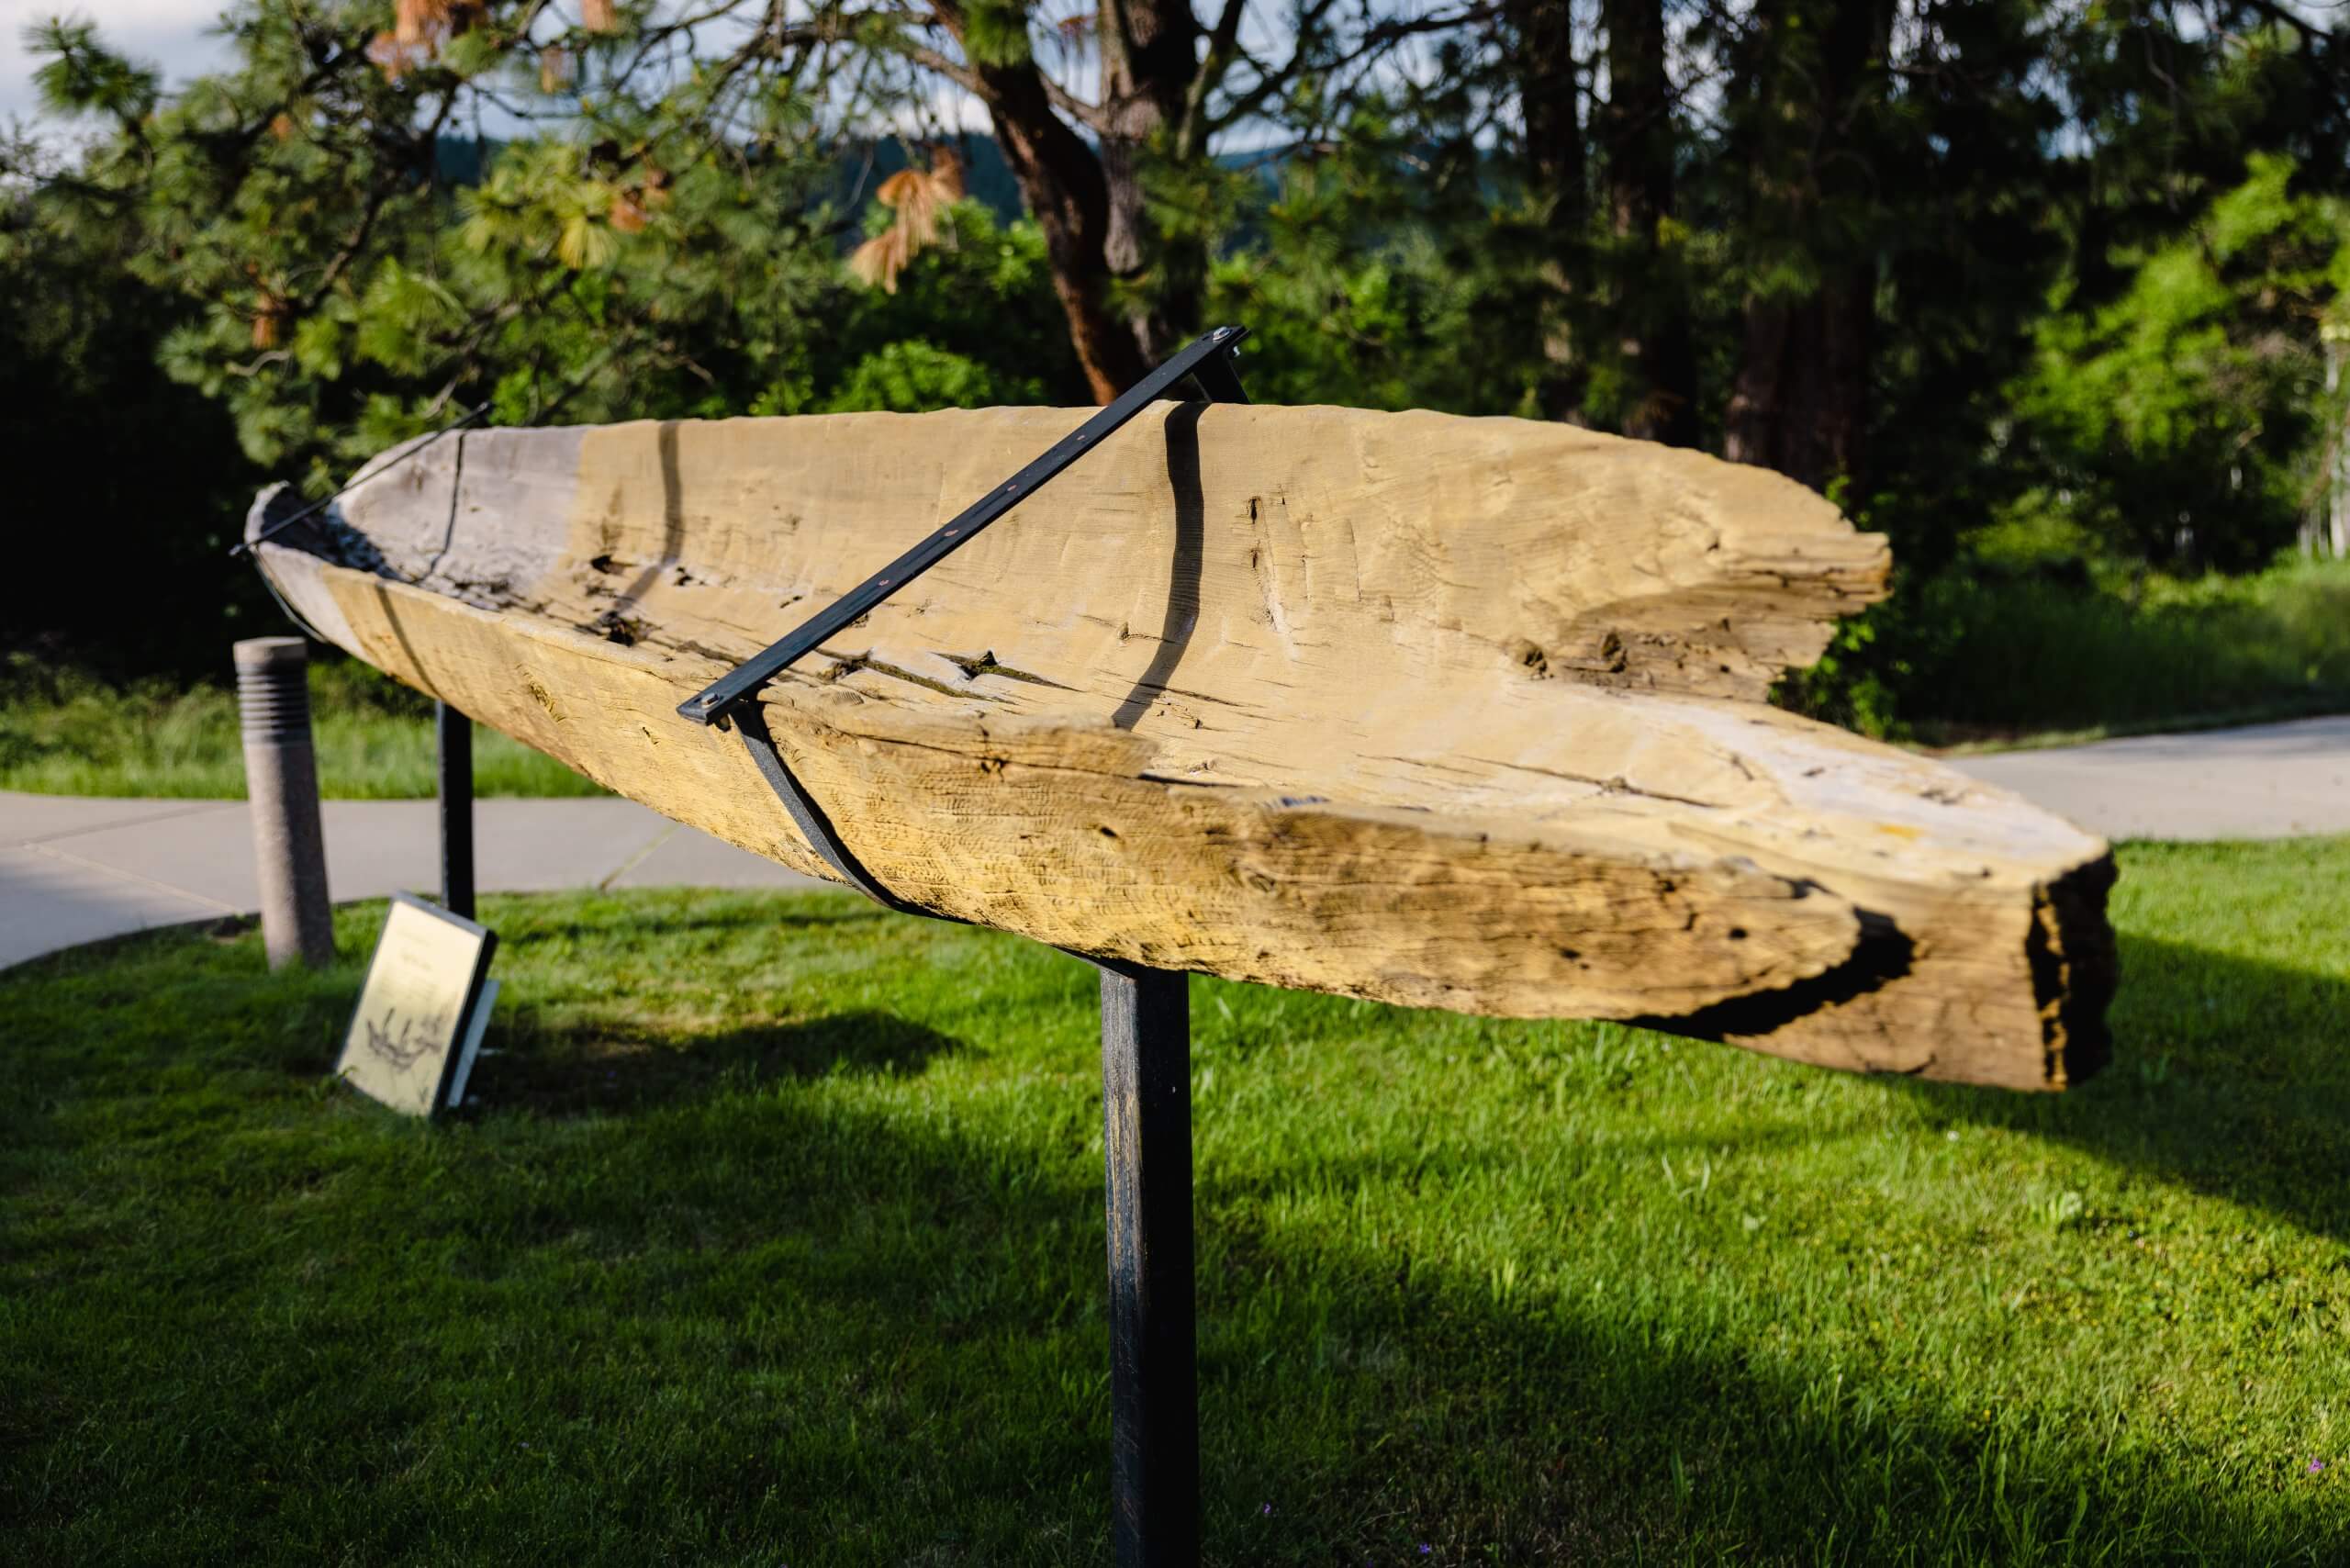 A carved canoe displayed in a grassy area.